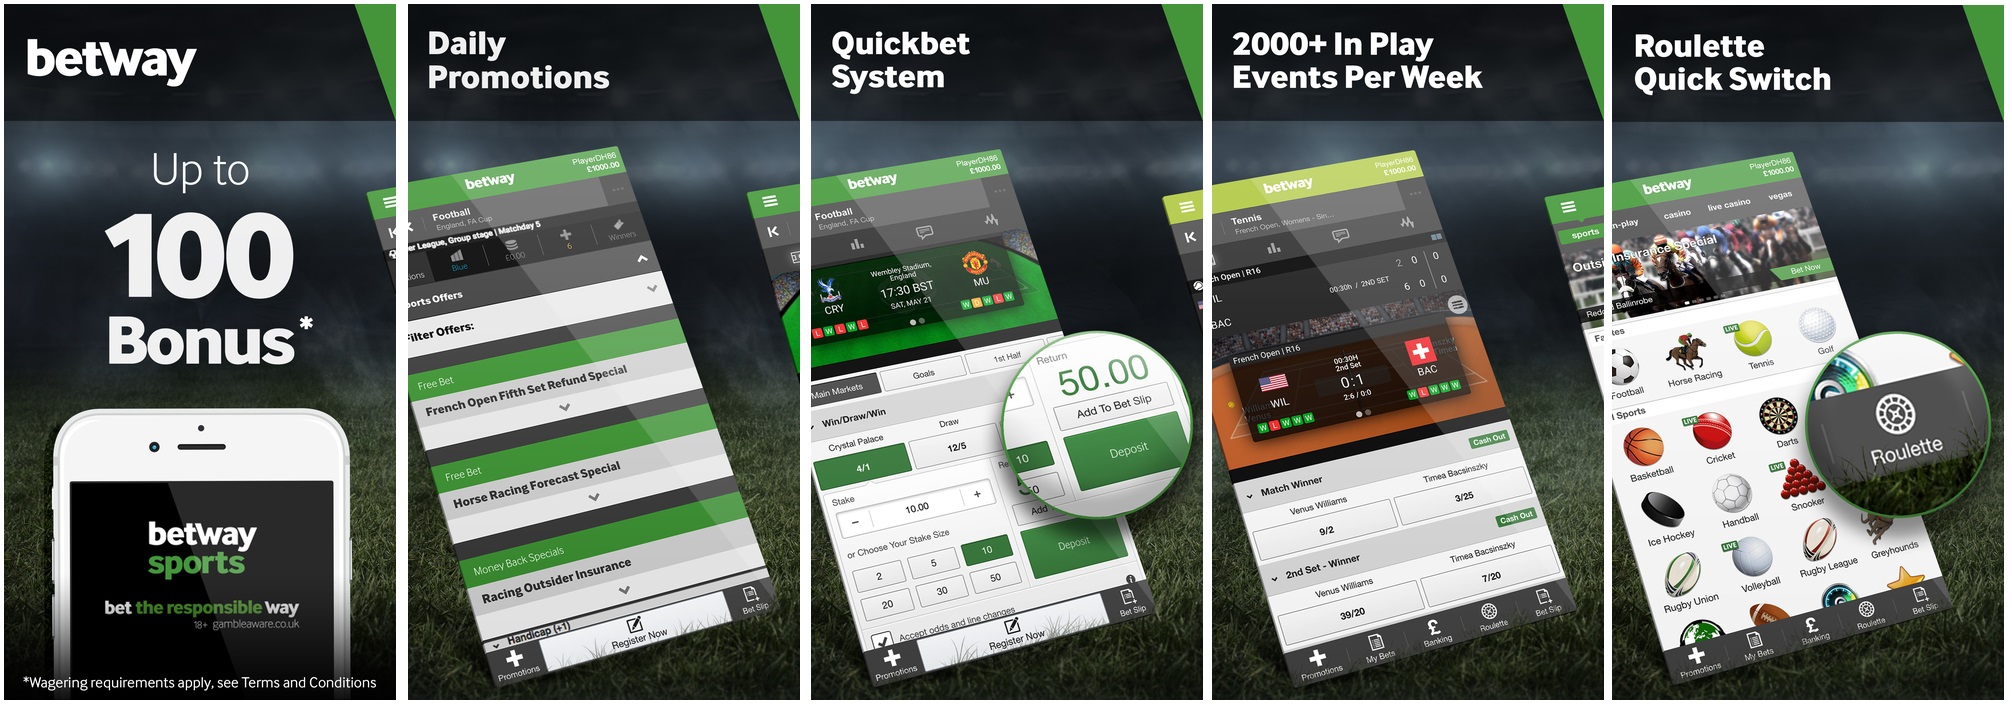 Betway Mobile App To Play On Android & iOS